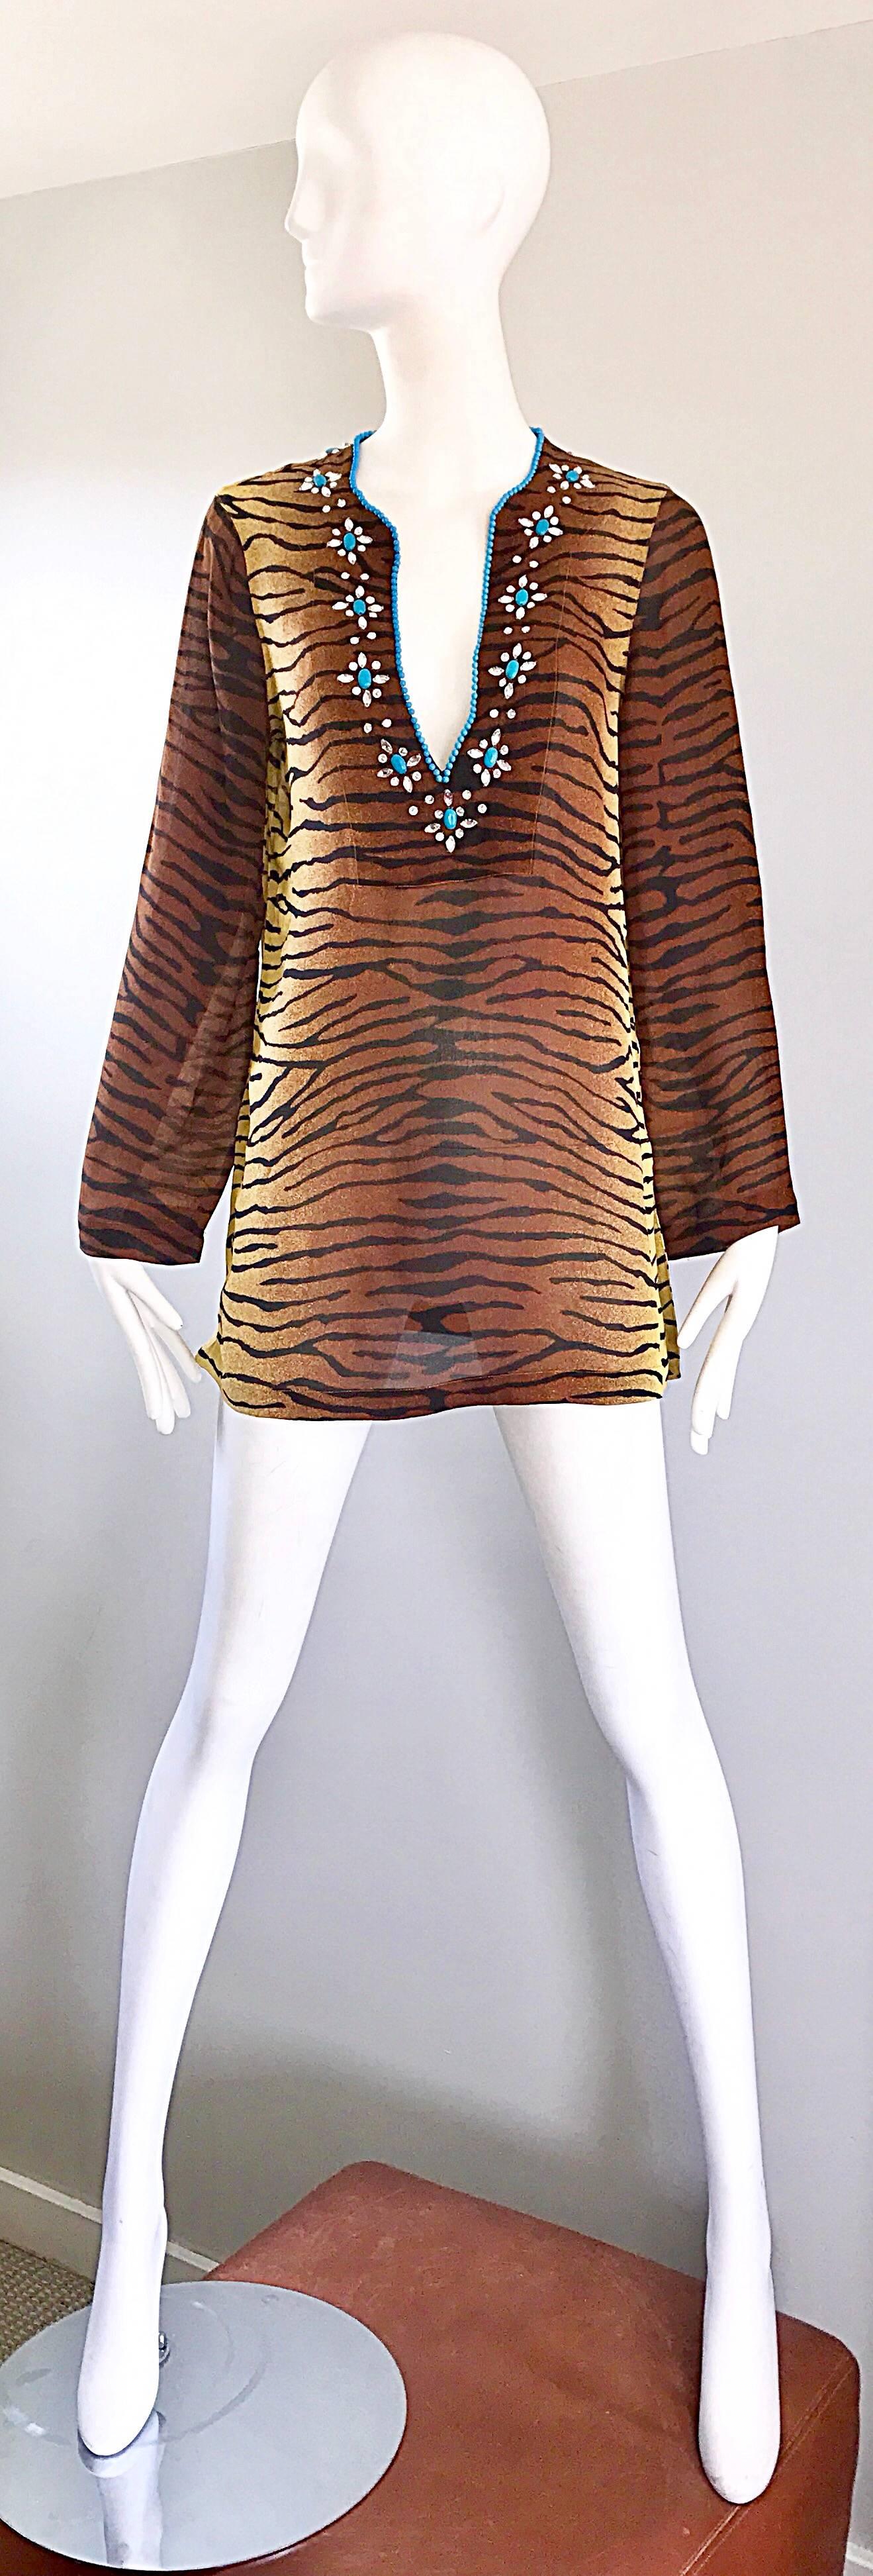 Beautiful vintage 90s MICHAEL KORS COLLECTION tiger / zebra print silk chiffon tunic blouse! Features hand-sewn turquoise blue beads and rhinestones around the v-neck. Features side vents on each side of the hem. Simply slips over the head. The